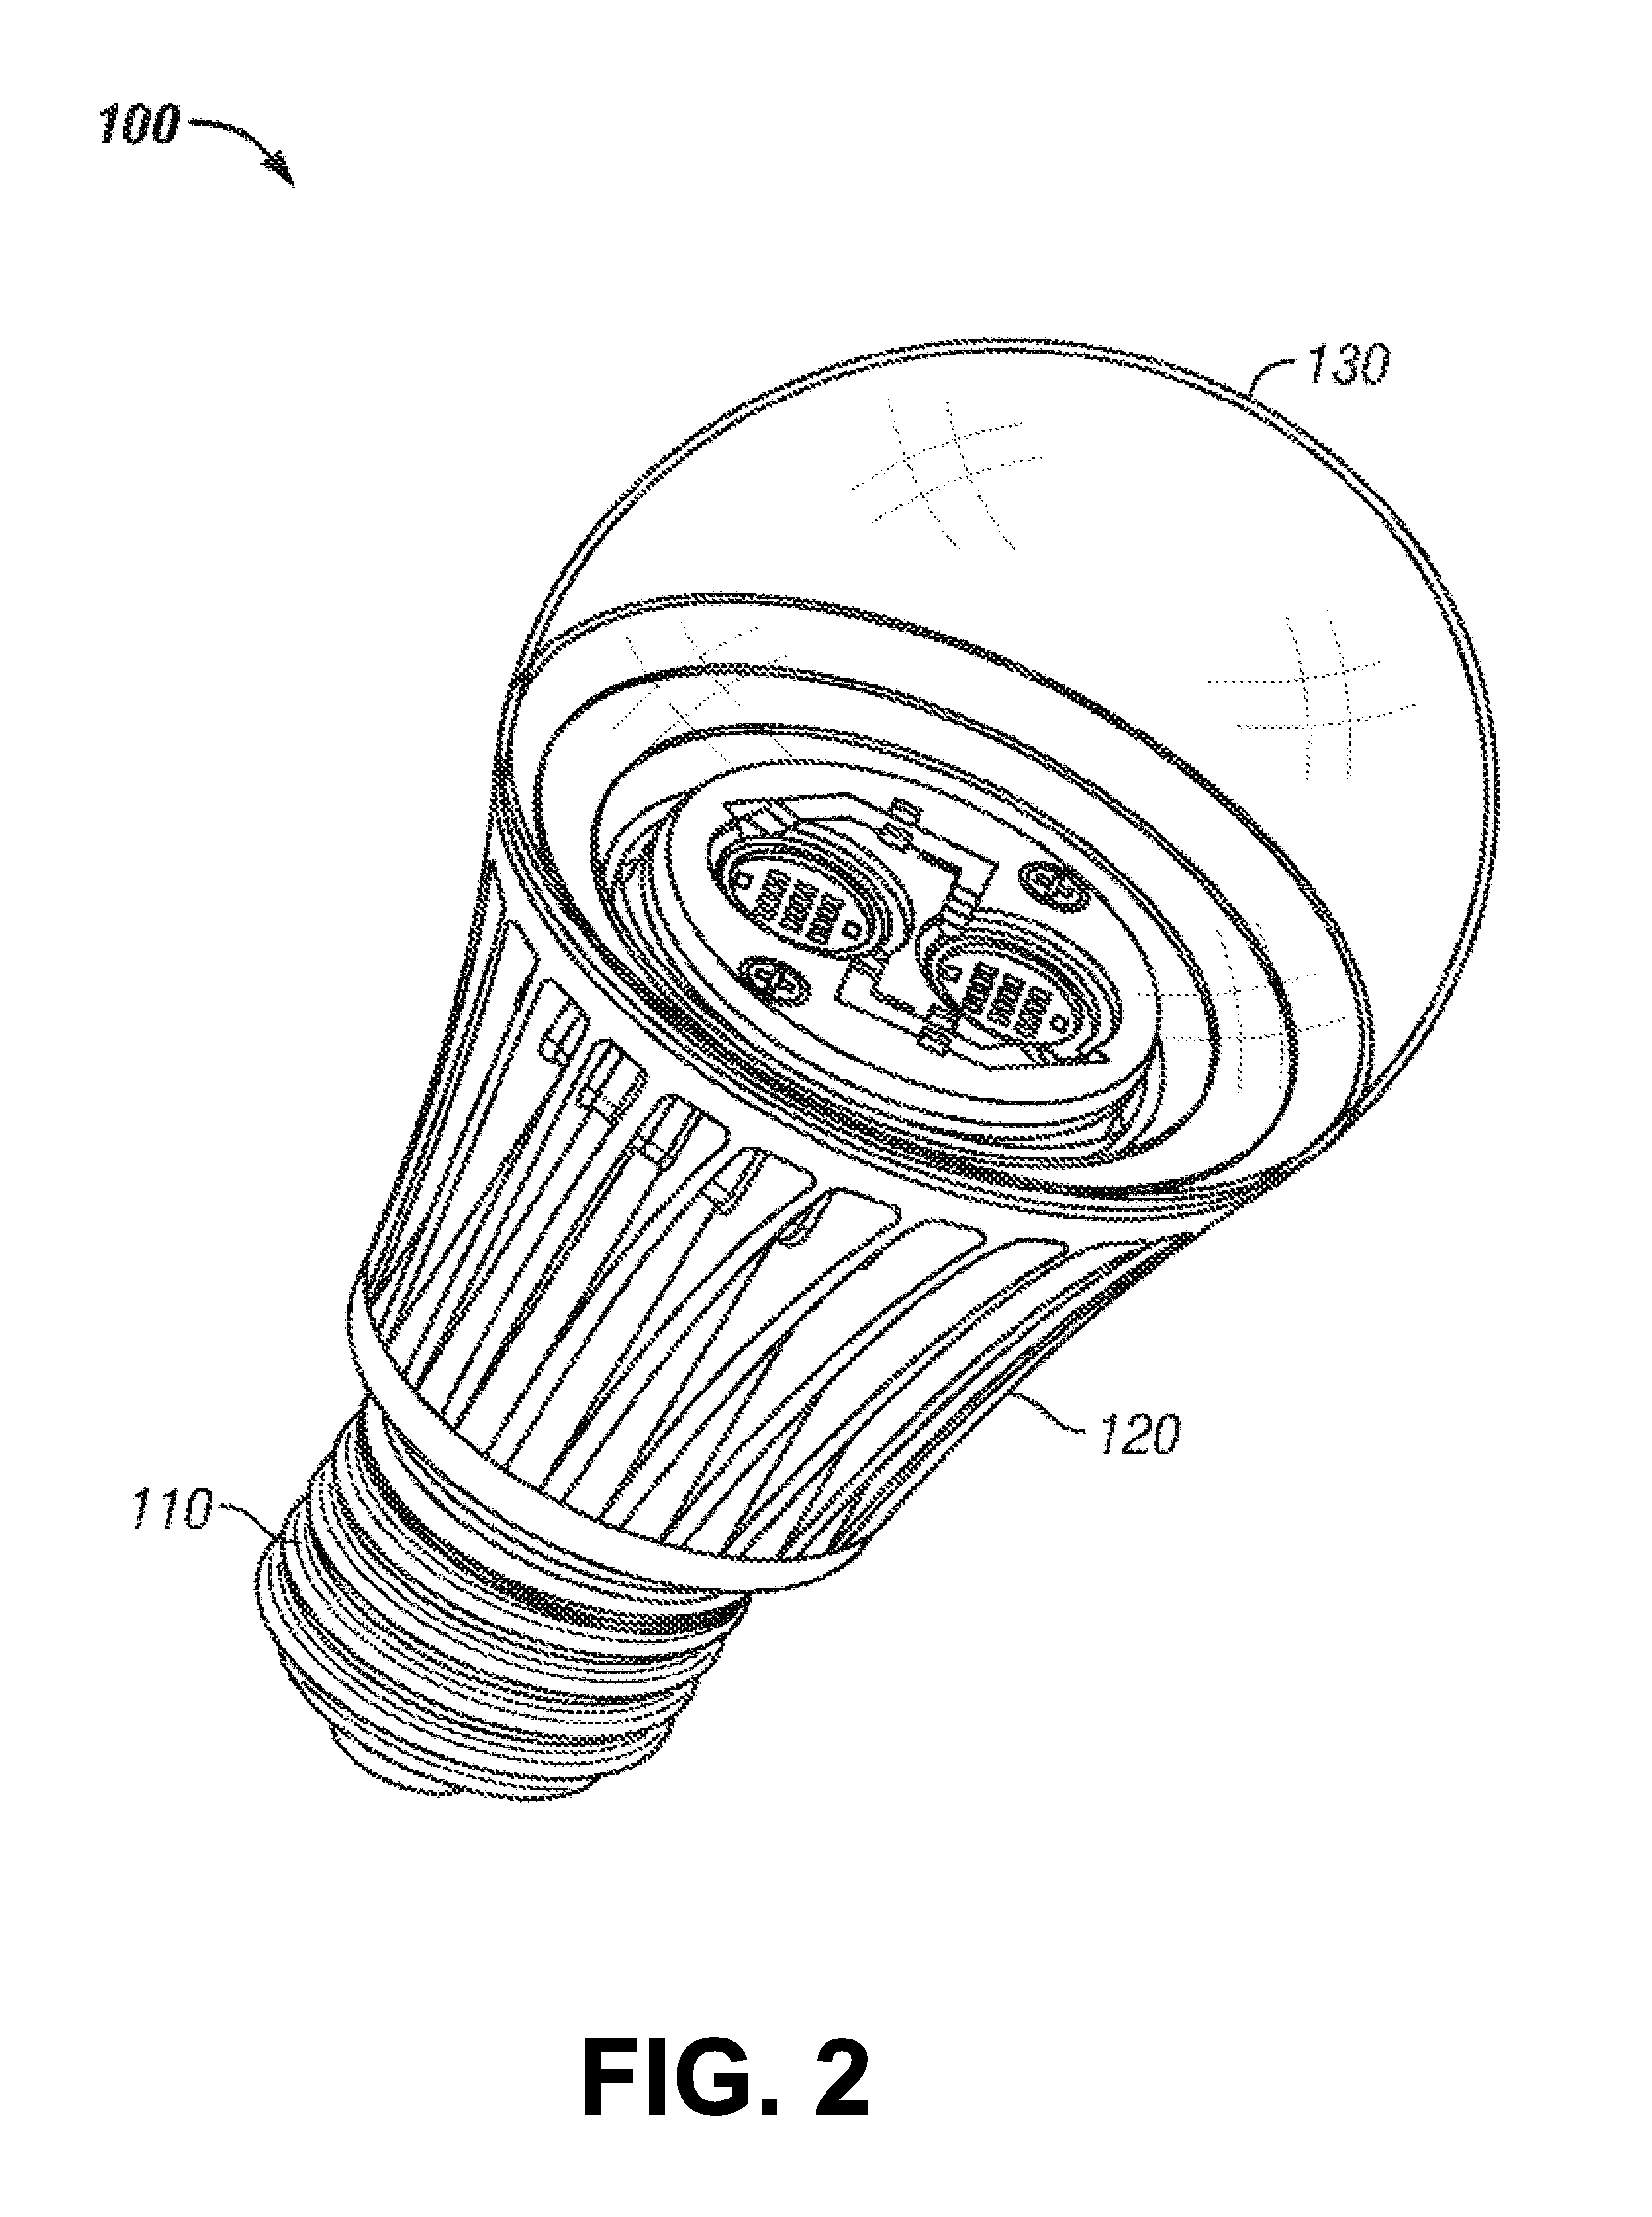 Tunable LED lamp for producing biologically-adjusted light